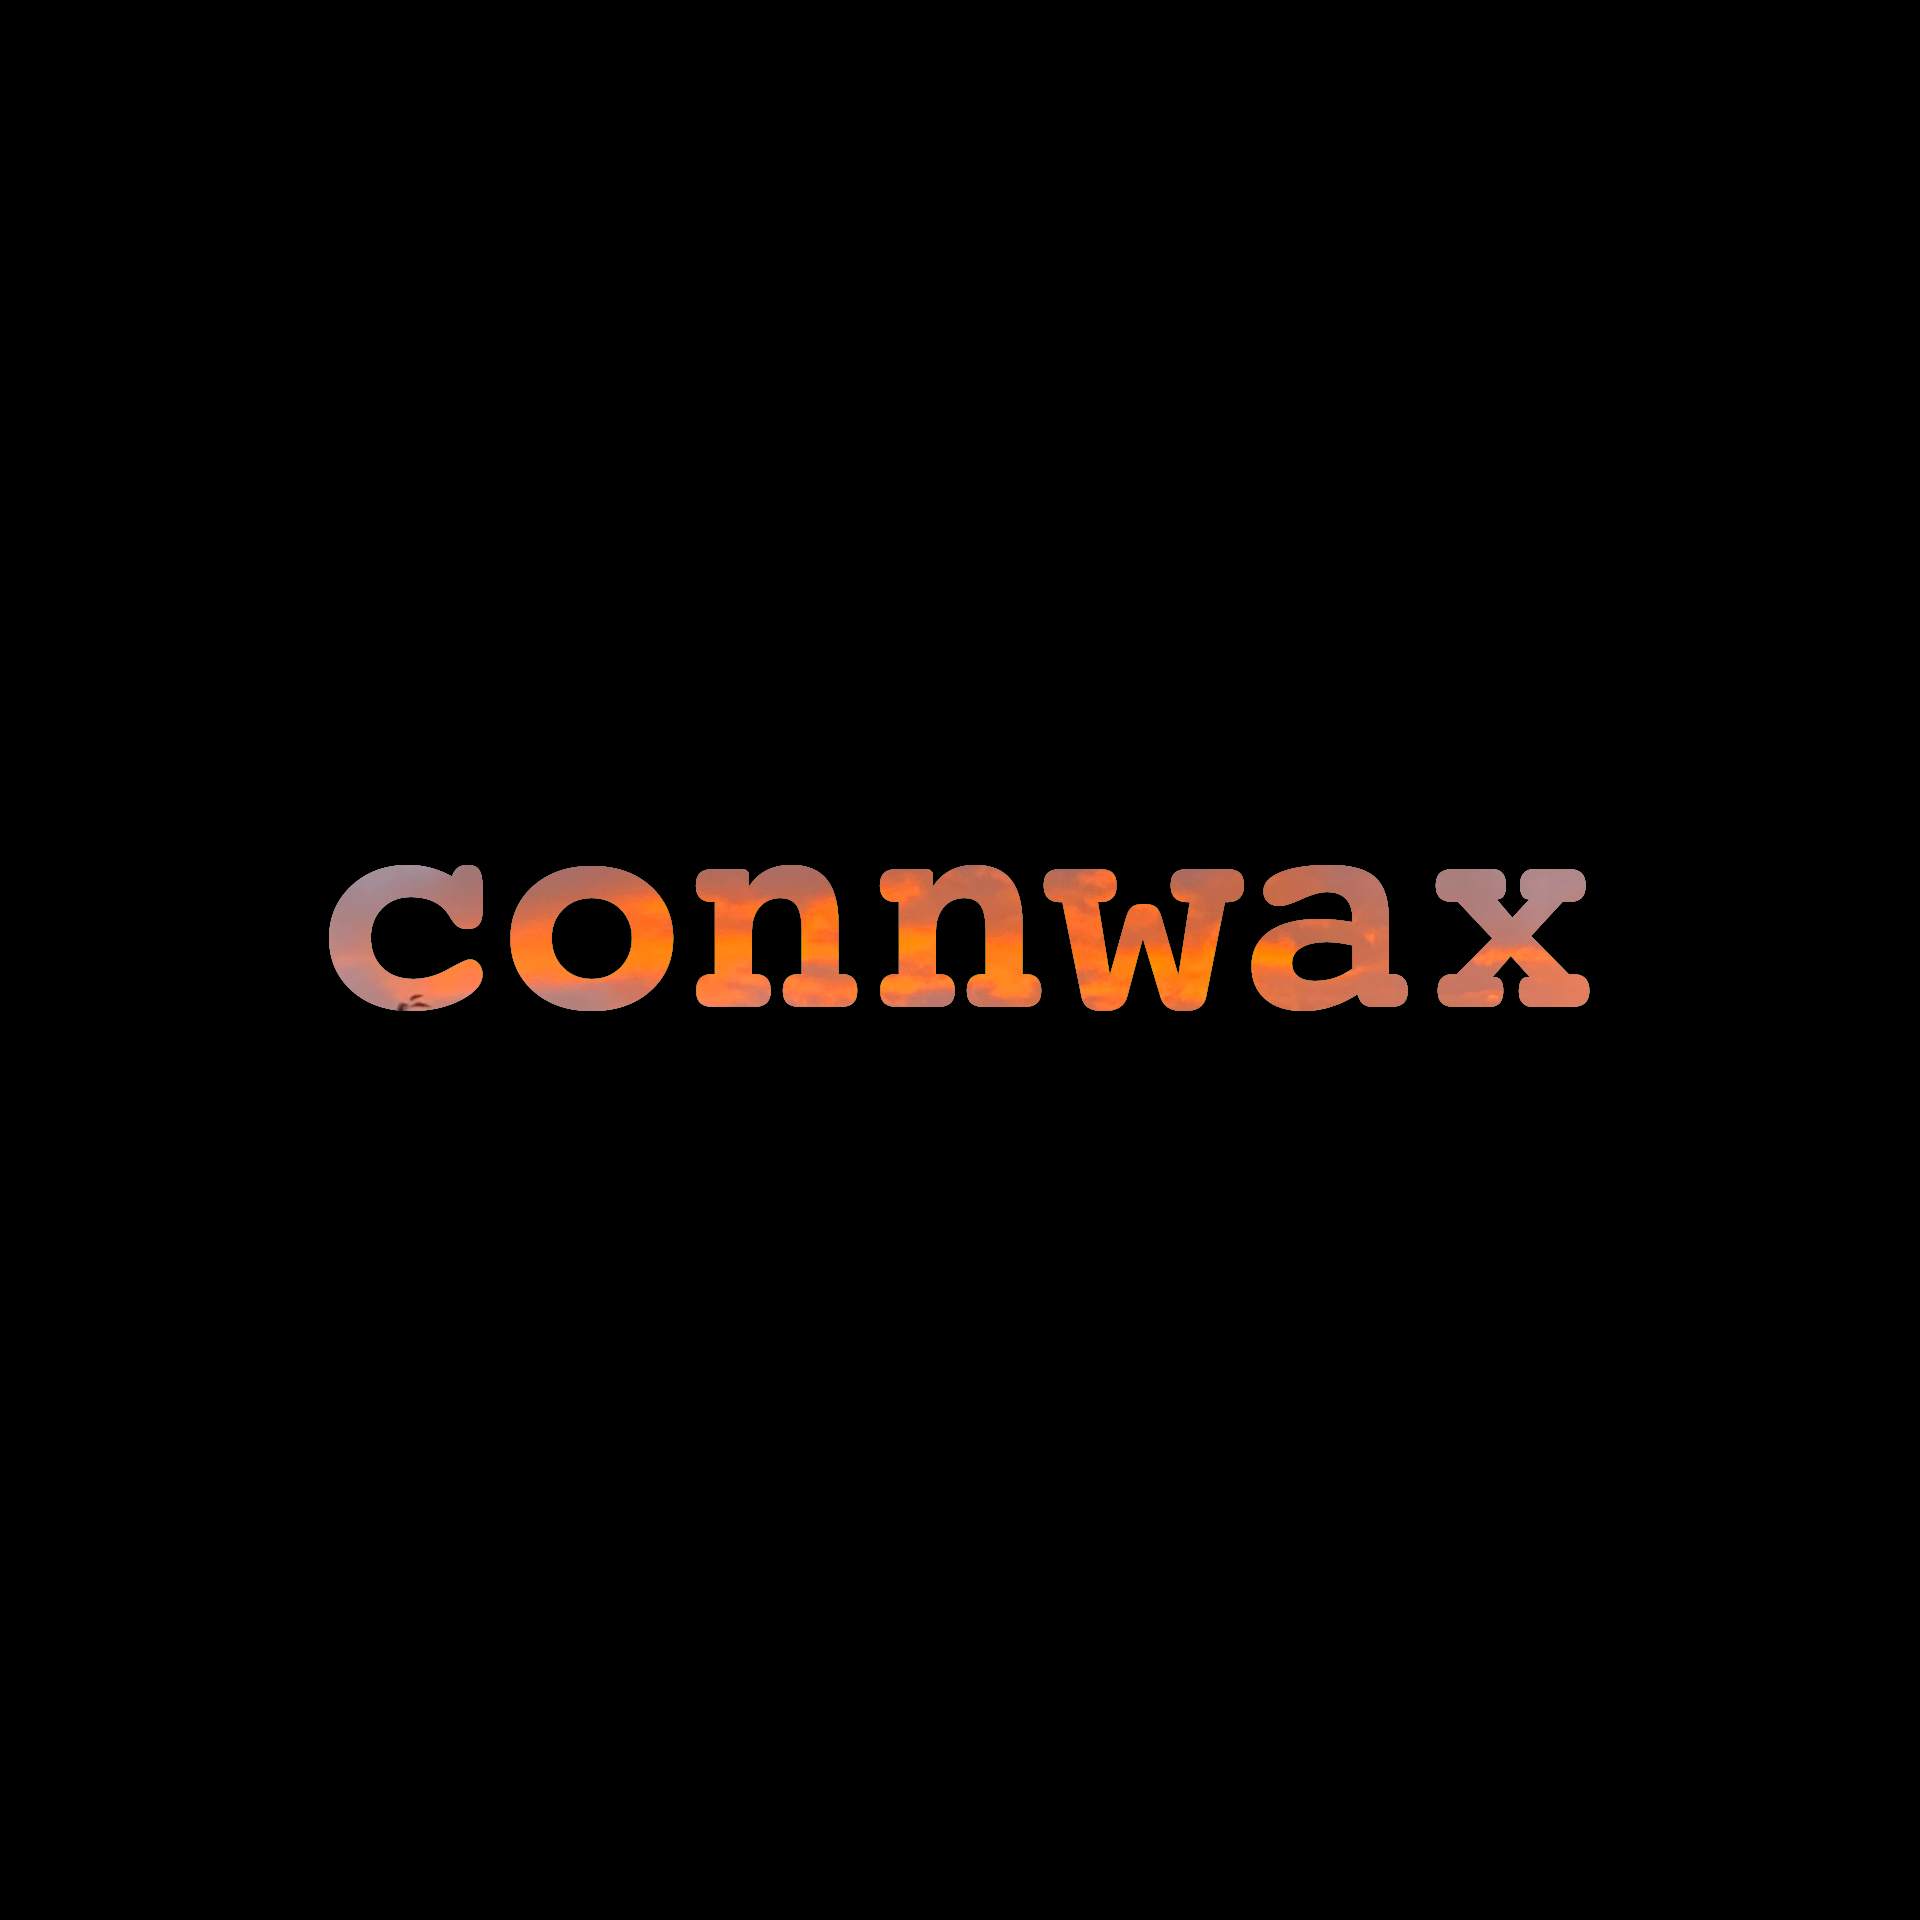 connwax - フライヤー表